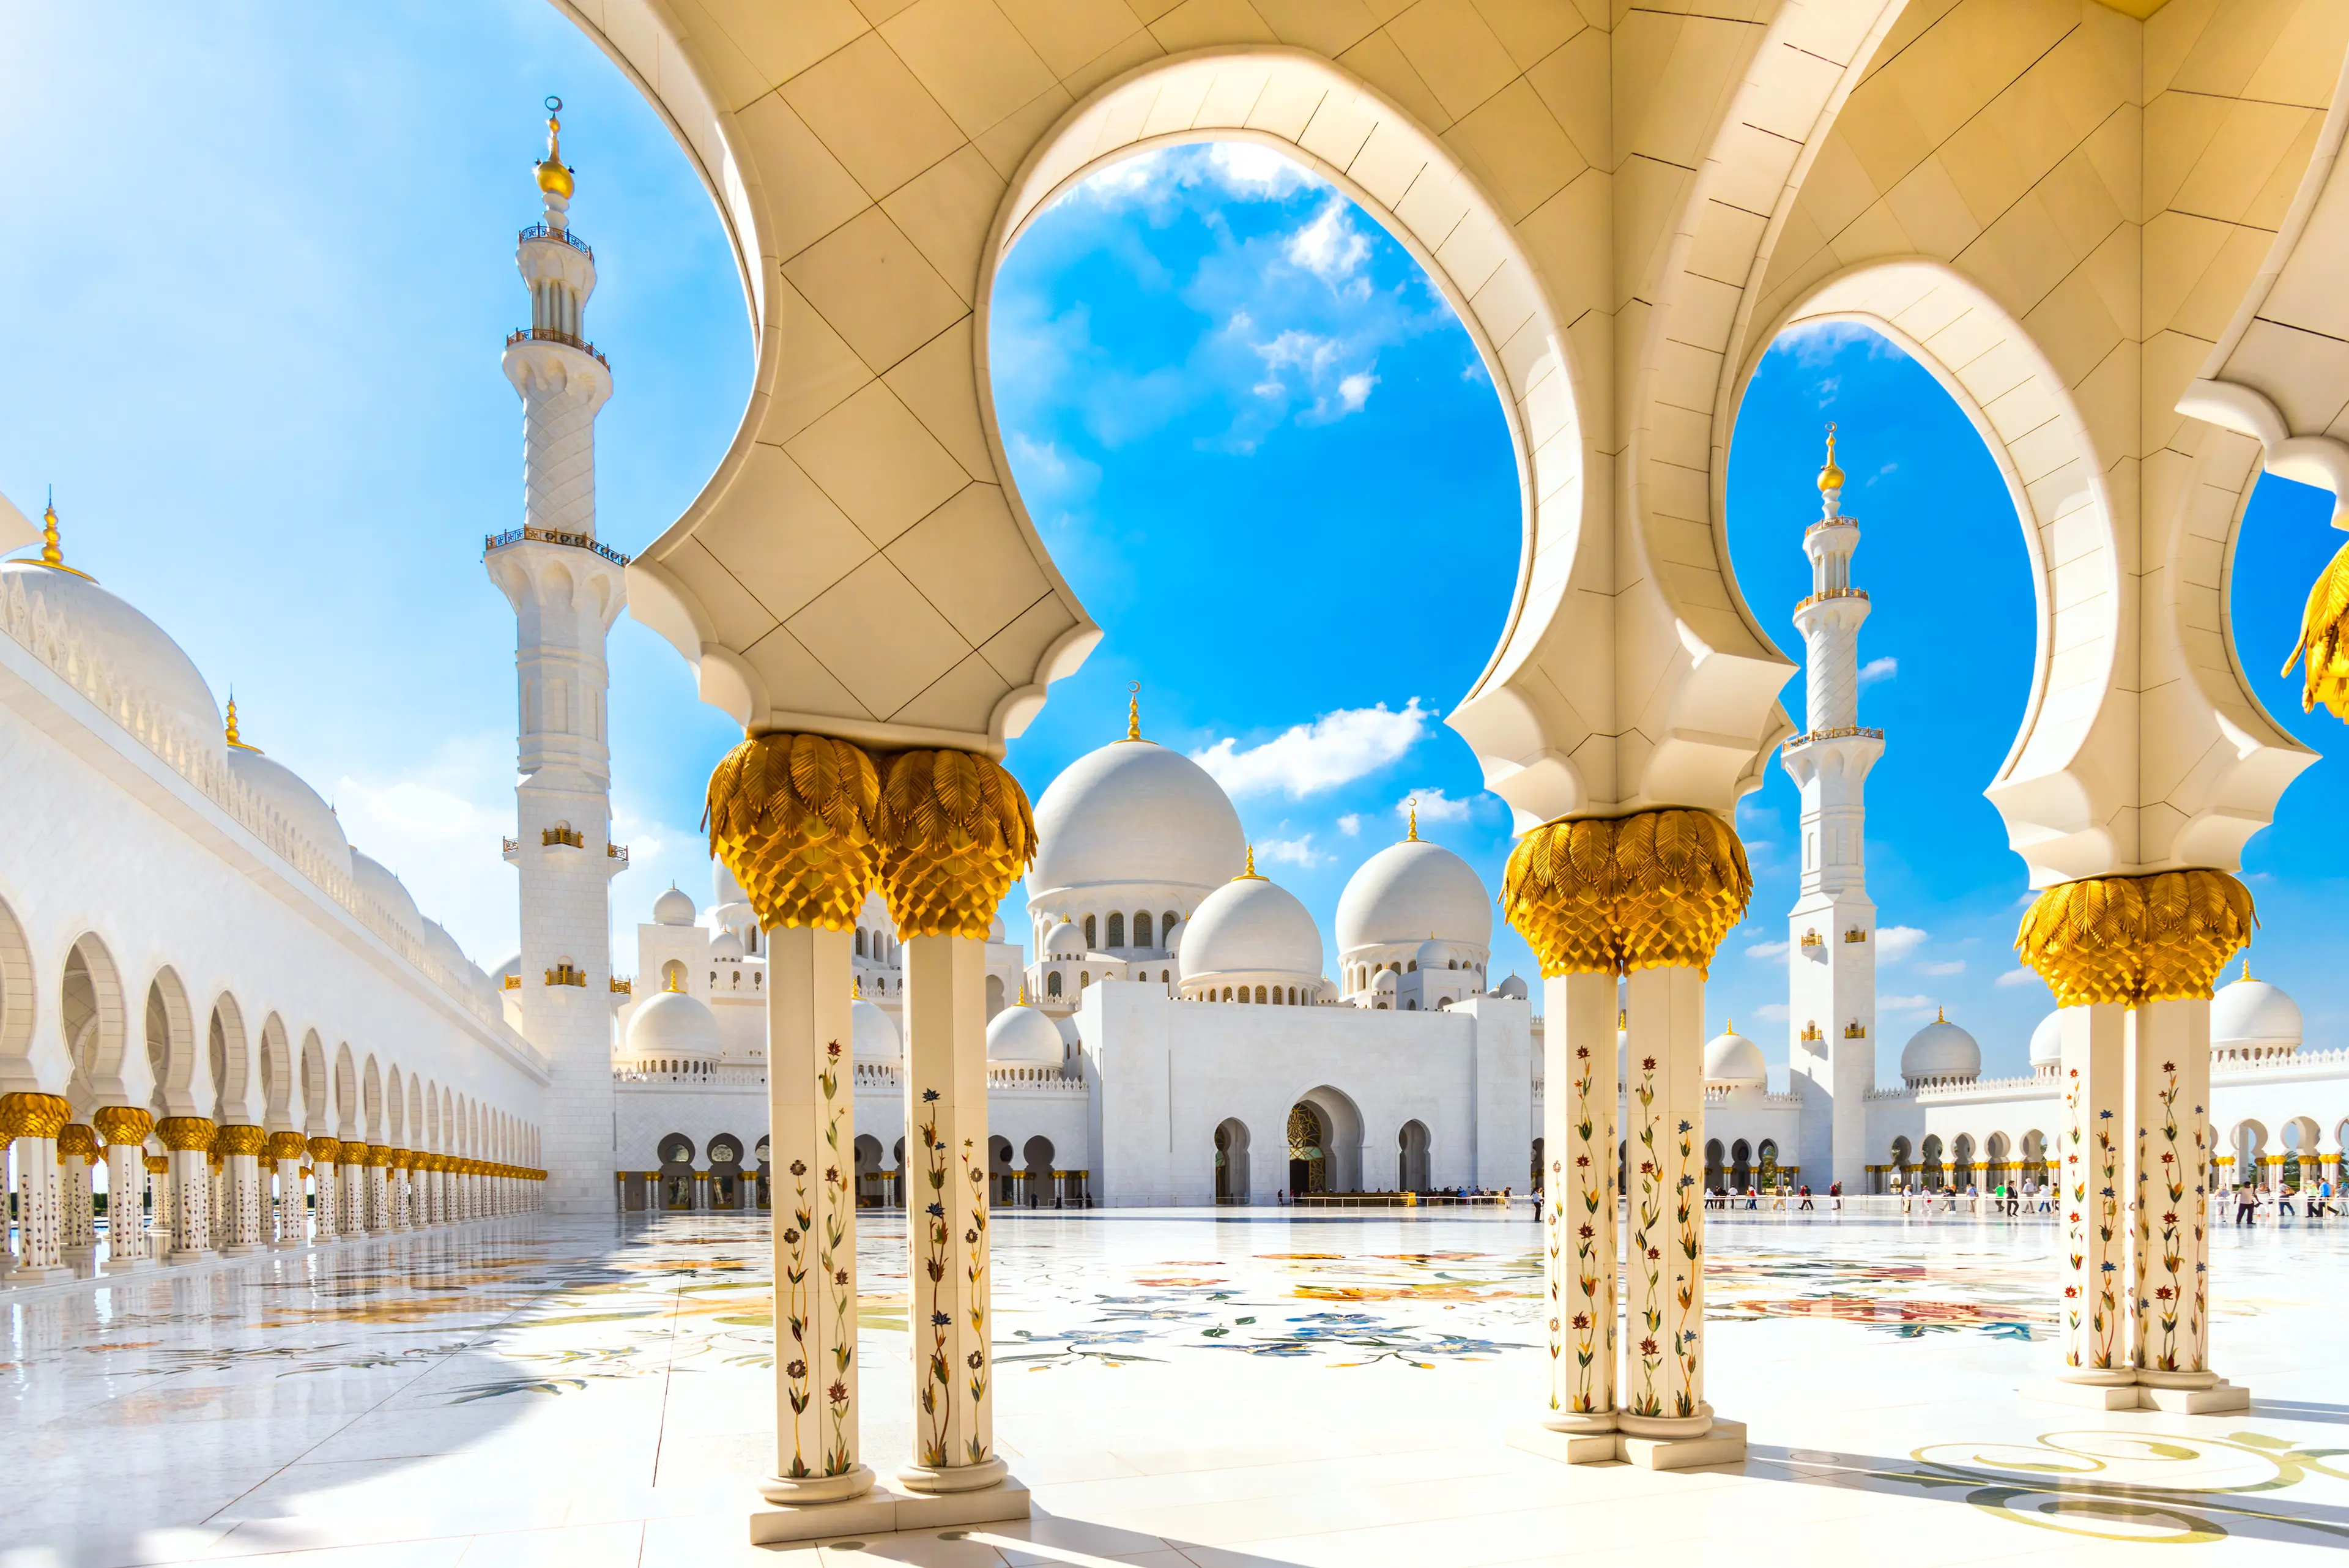 6-Day Family Relaxation & Shopping Adventure in Abu Dhabi